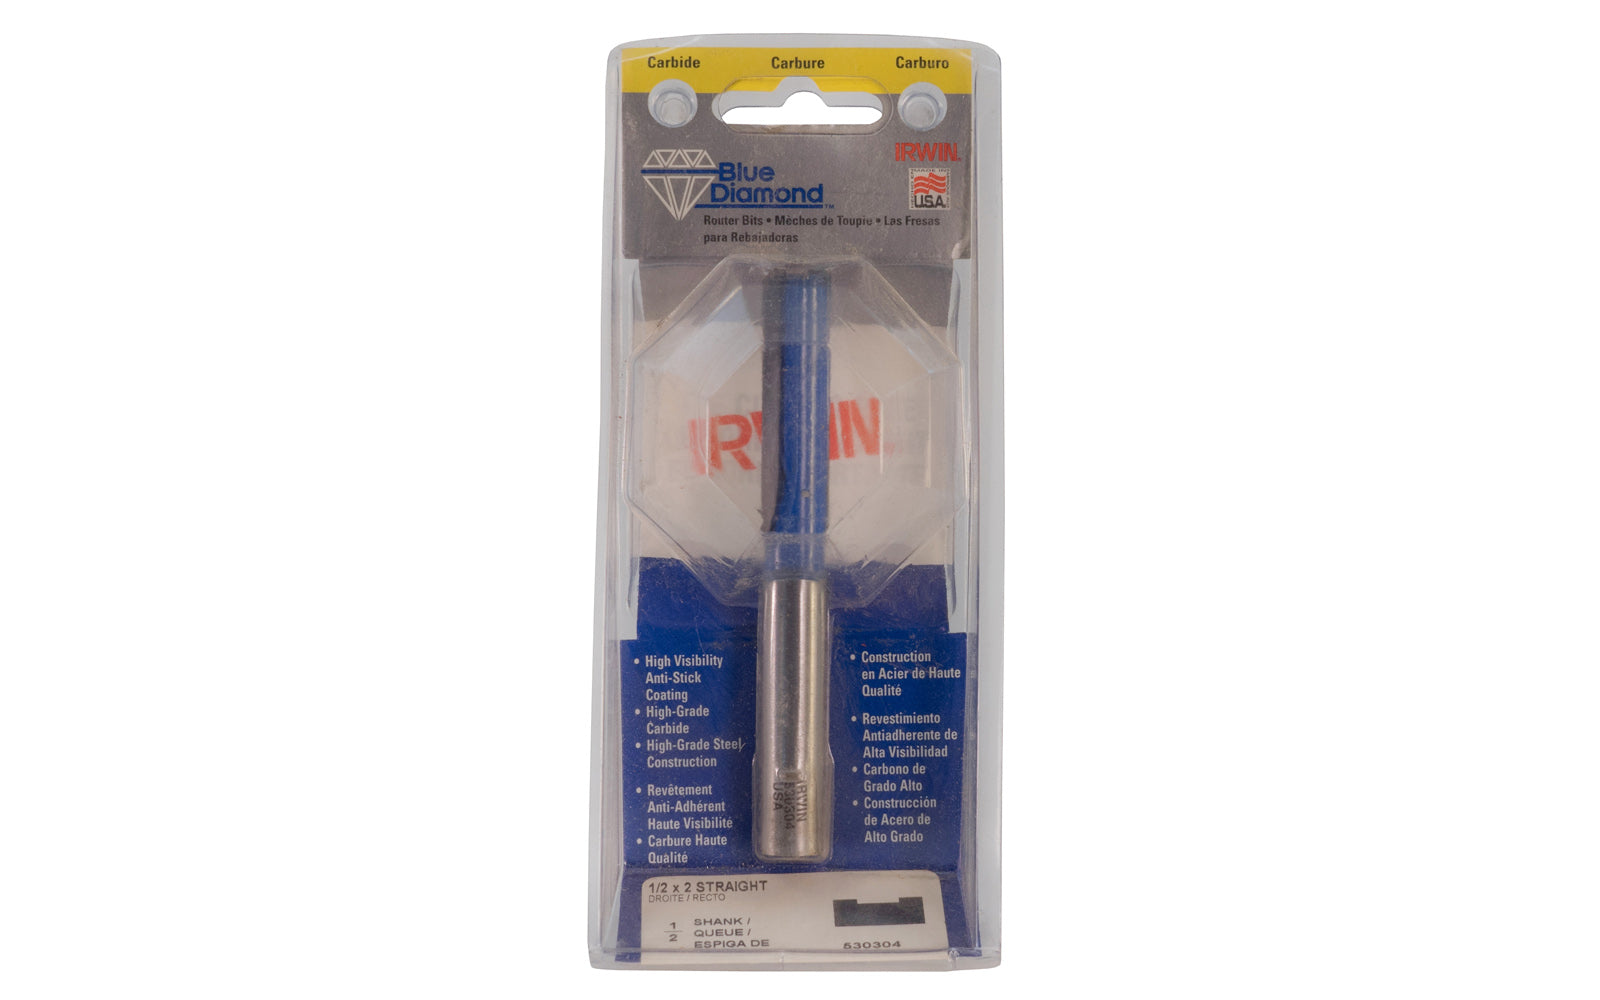 Irwin Carbide 1/2" x 2" Straight Router Bit - Made in USA. Carbide - High Grade Steel construction Router Bit. 2" depth. 4-3/4" overall length. 1/2" shank. Irwin Blue Diamond Model No. 520304. Made in USA.